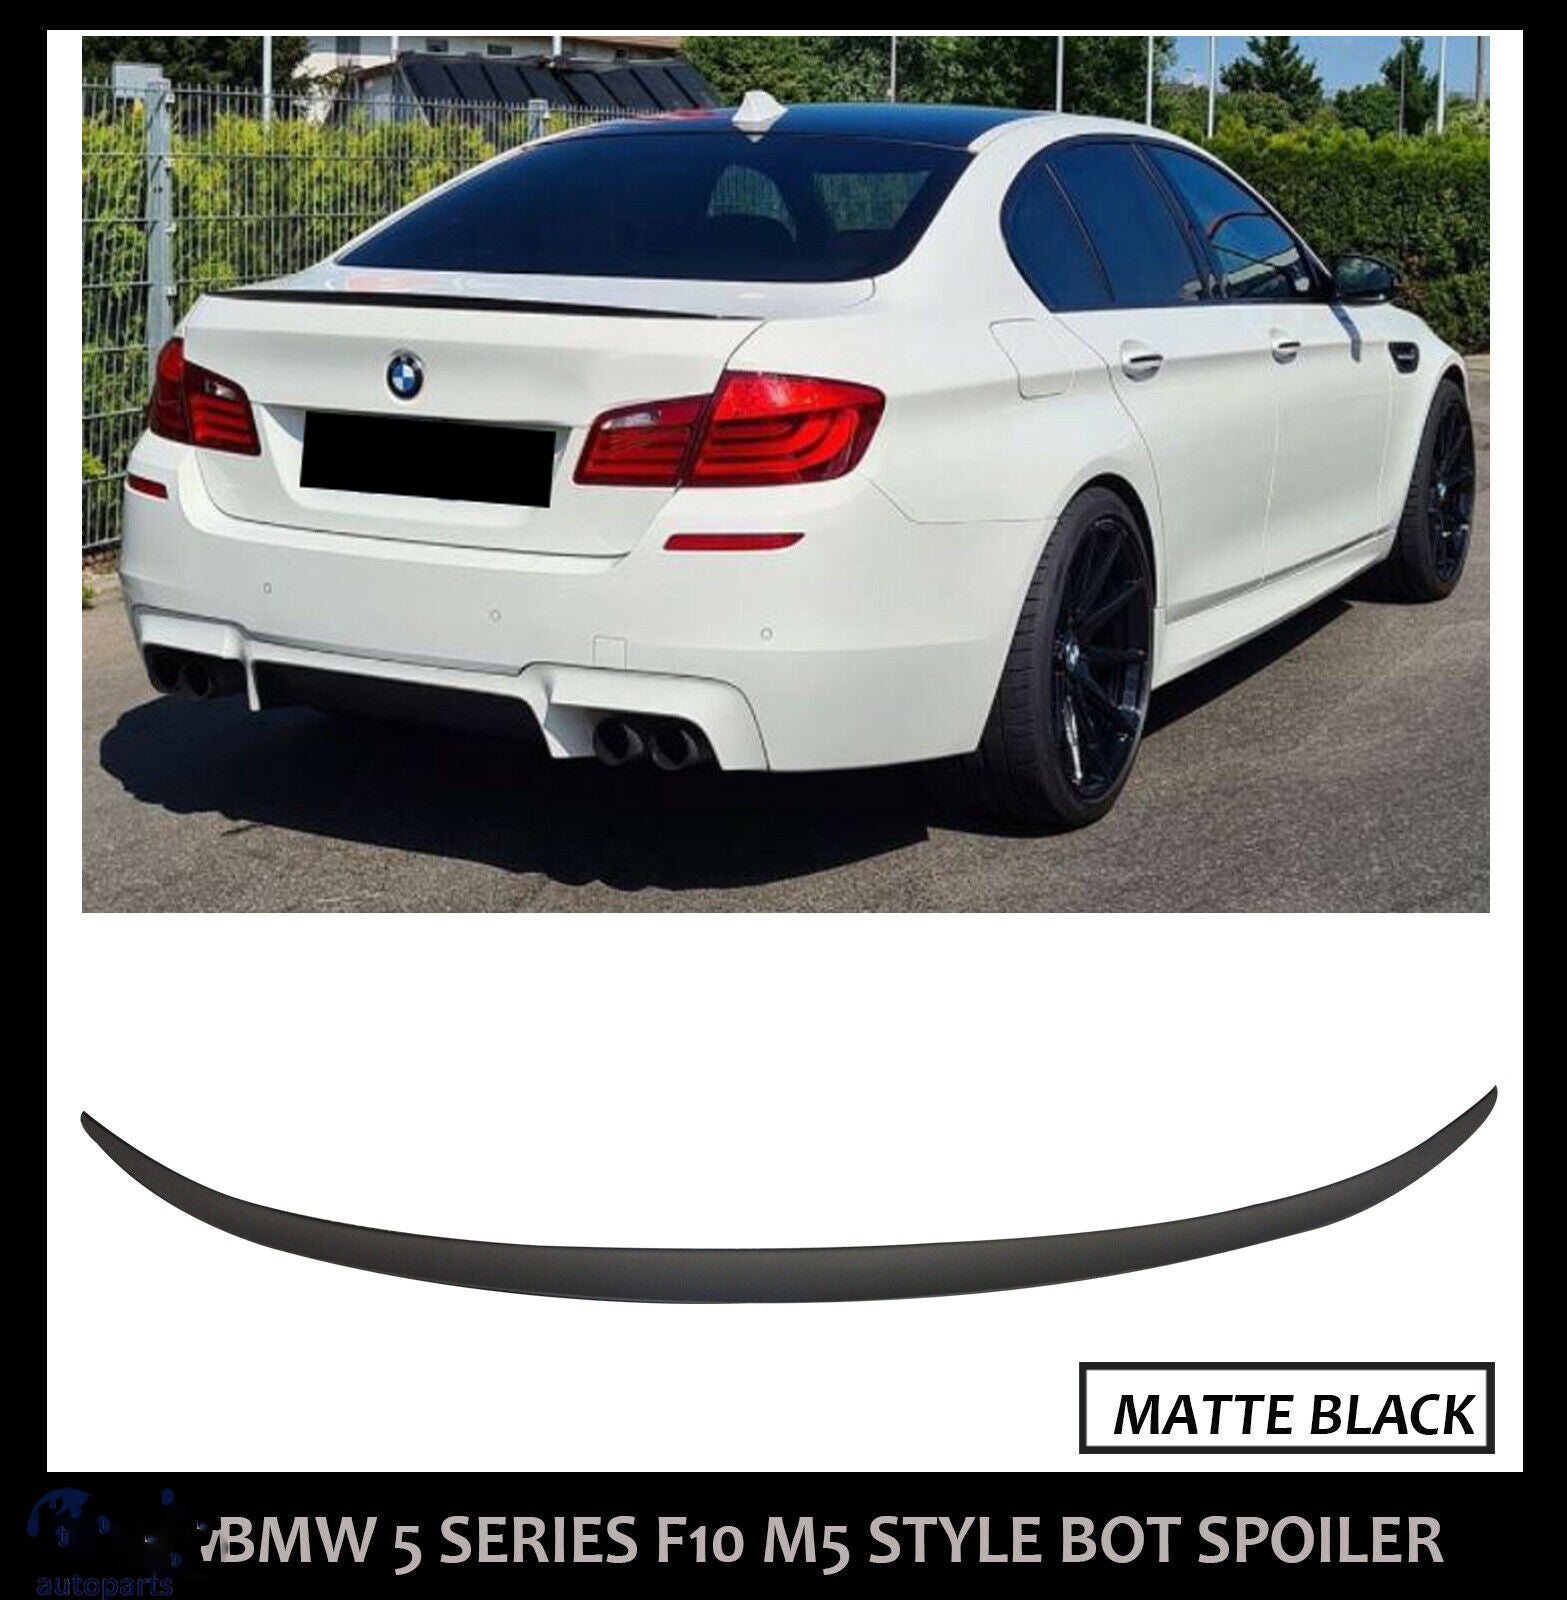 Spoiler Lip for BMW F10 Glossy Black Rear Trunk Wing Lid